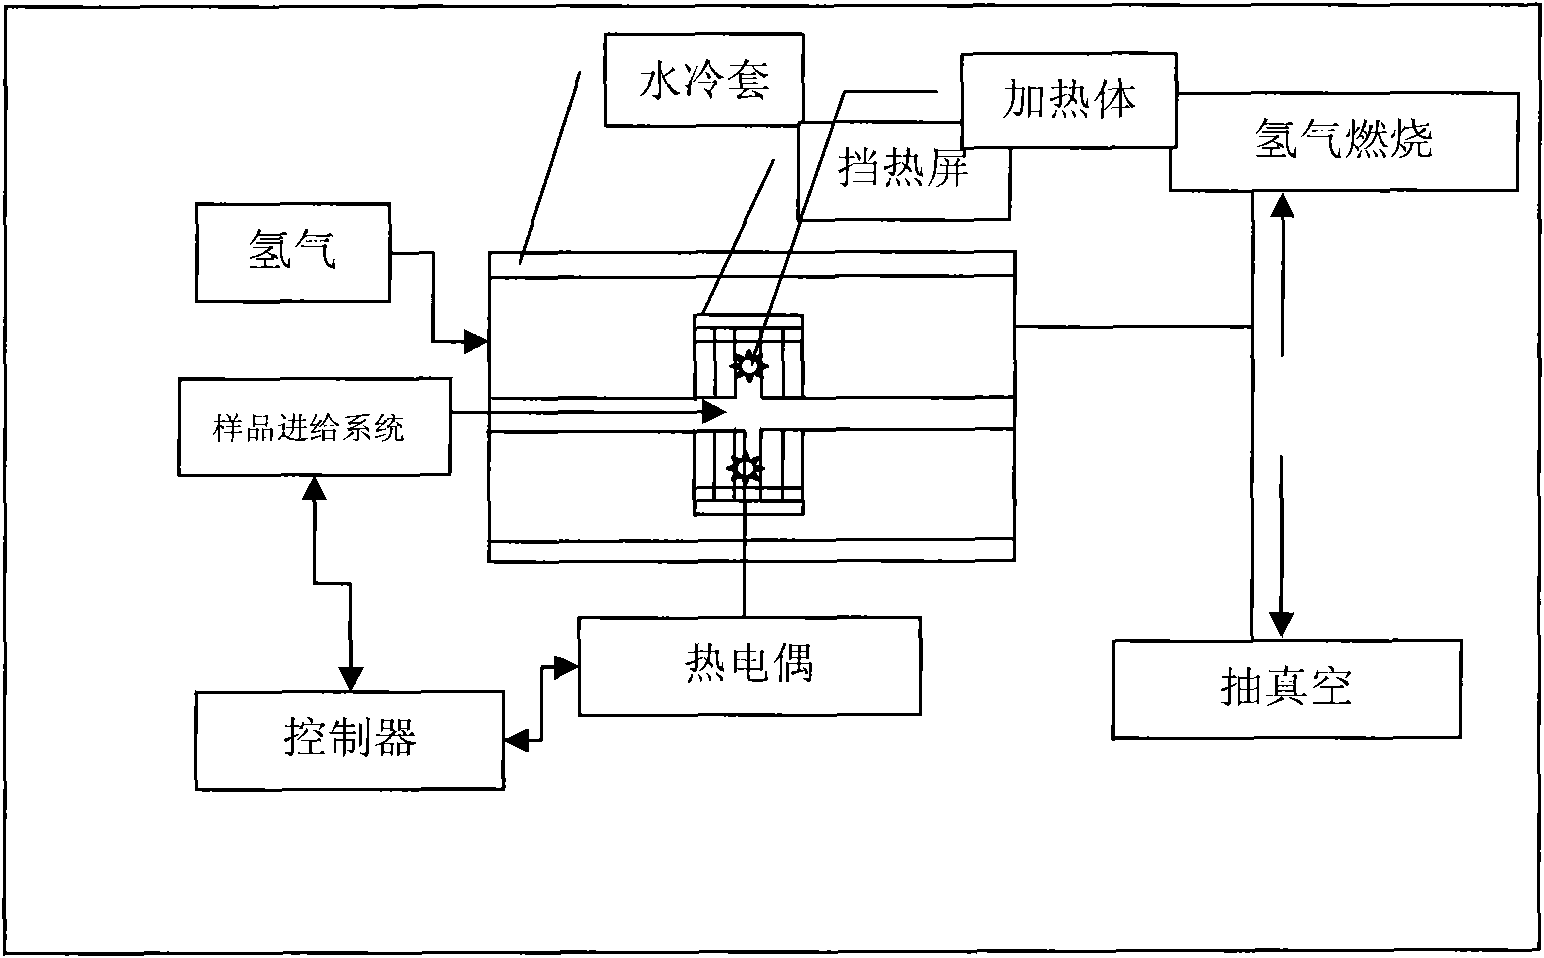 Temperature control-material feeding coupled zone fritting furnace